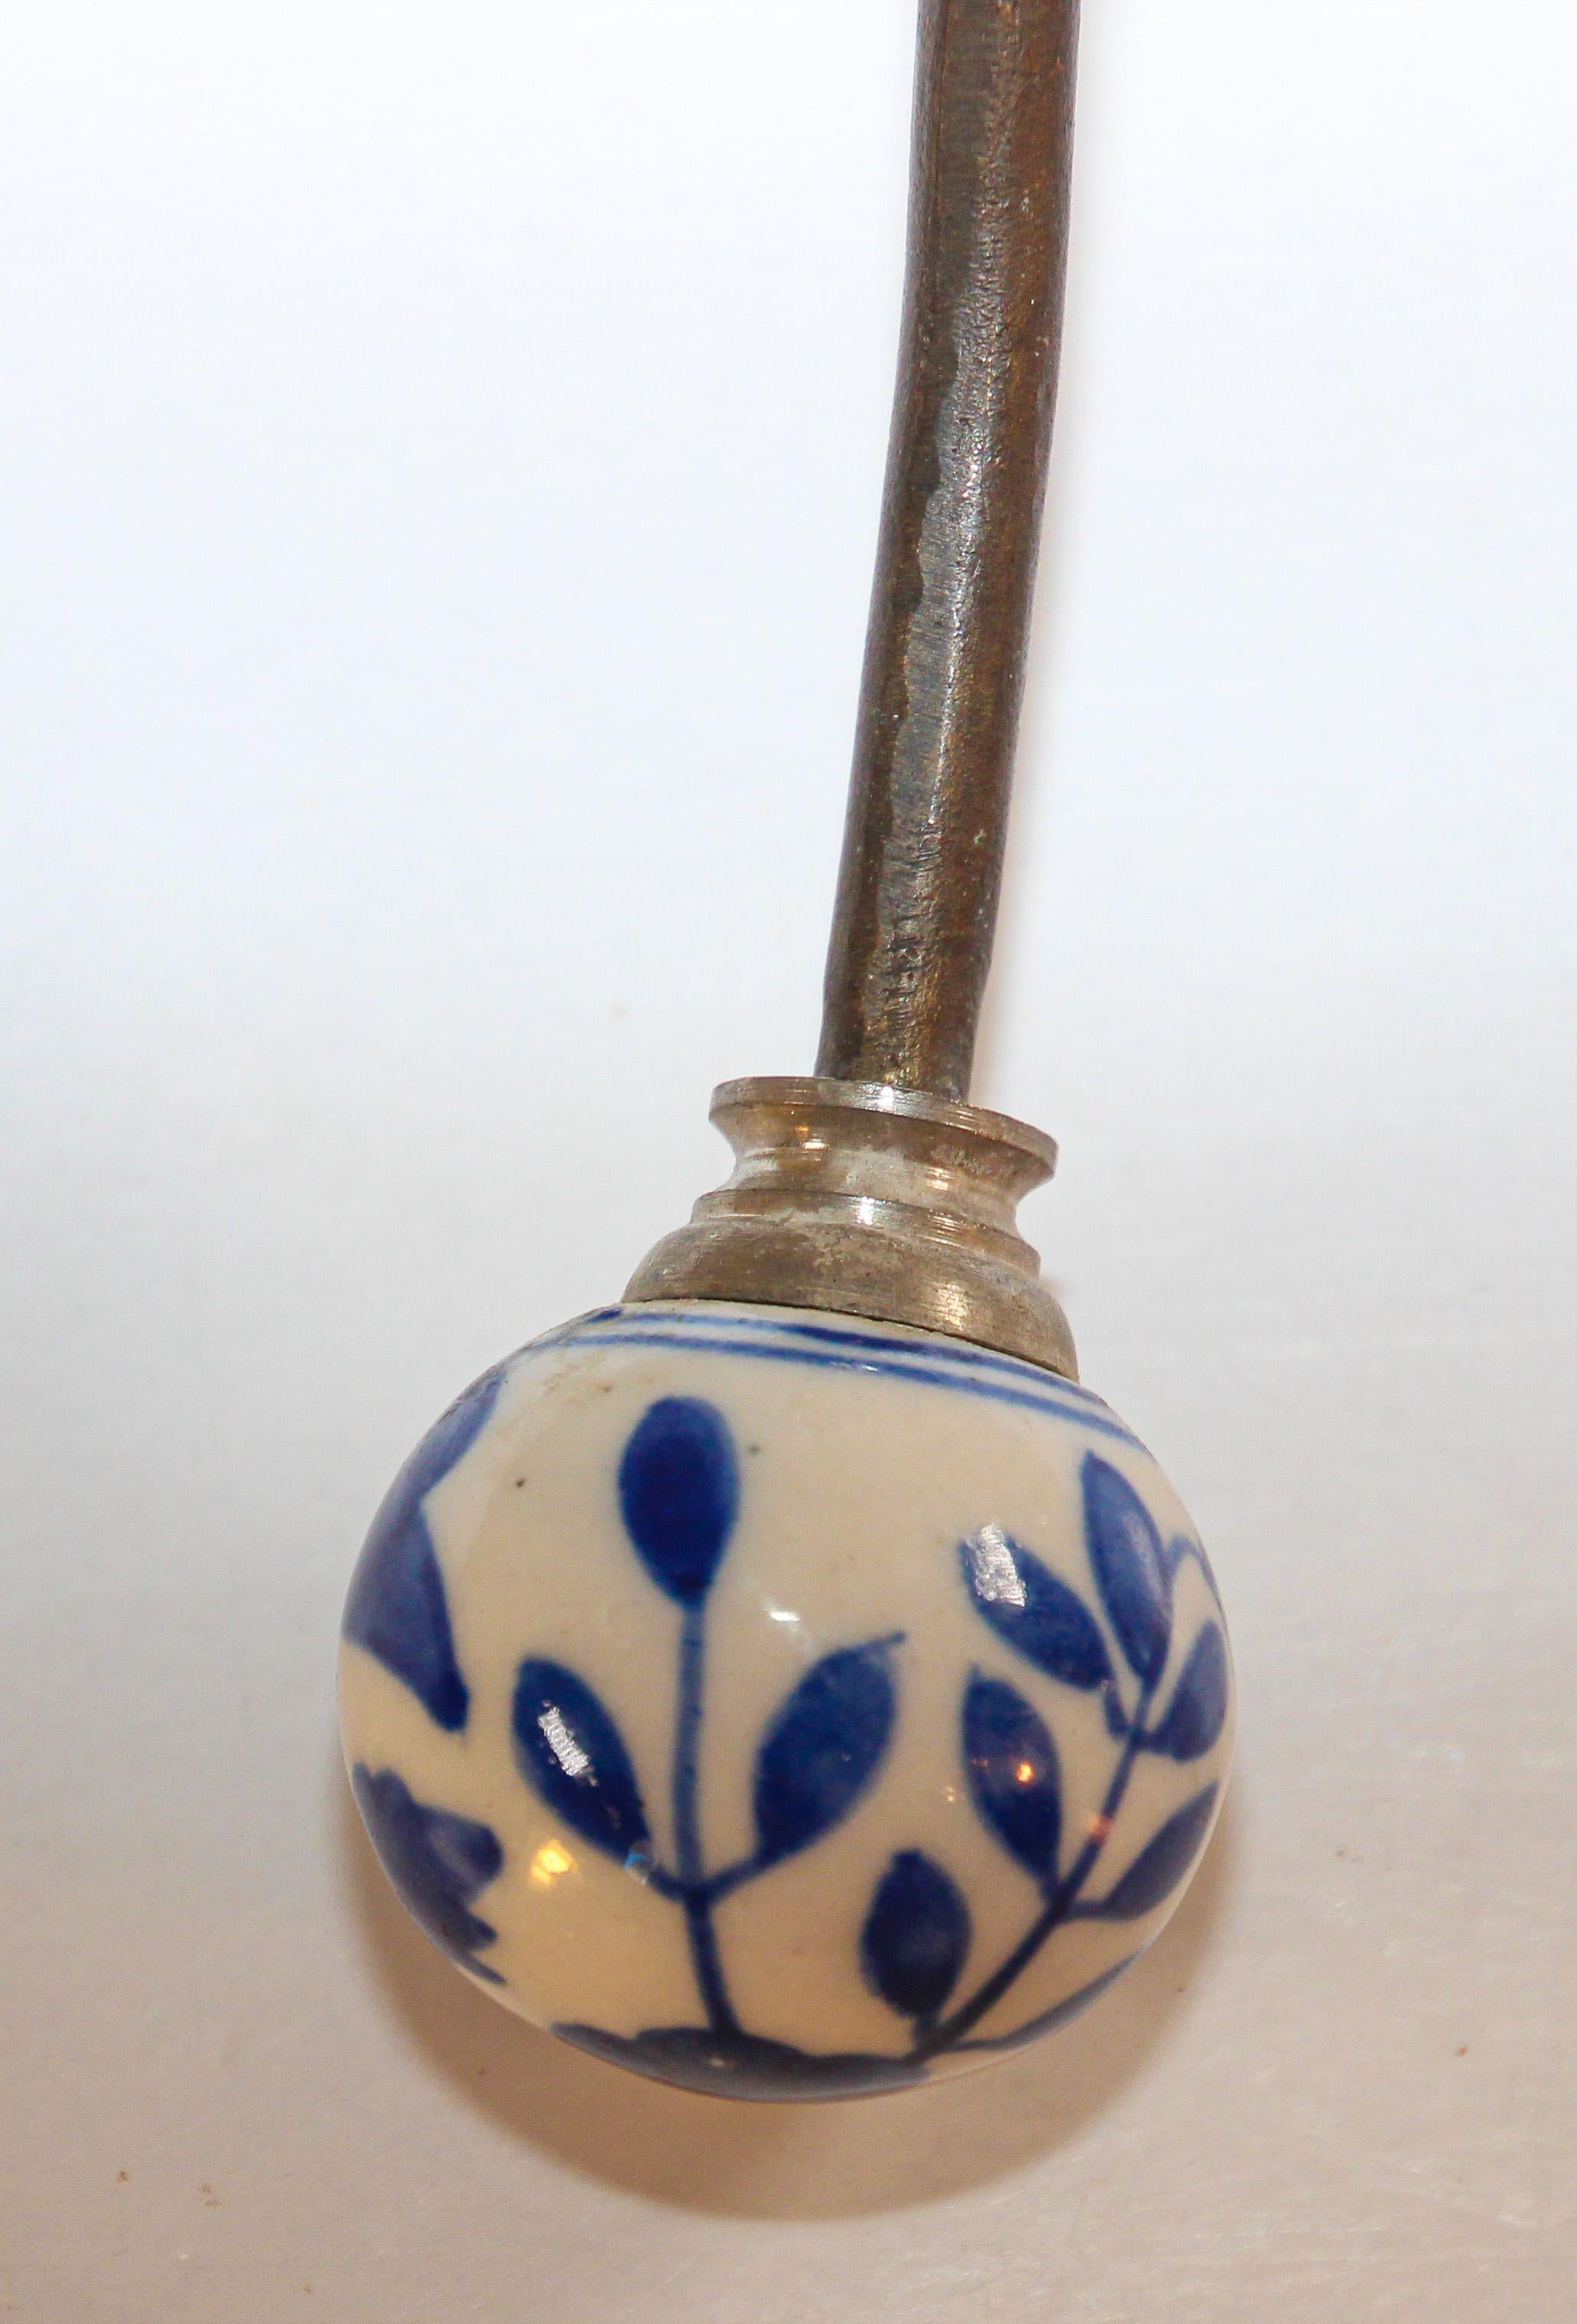 Cast Vintage Wall Double Metal Brass Hook with Porcelain Dutch Delft Style Finals